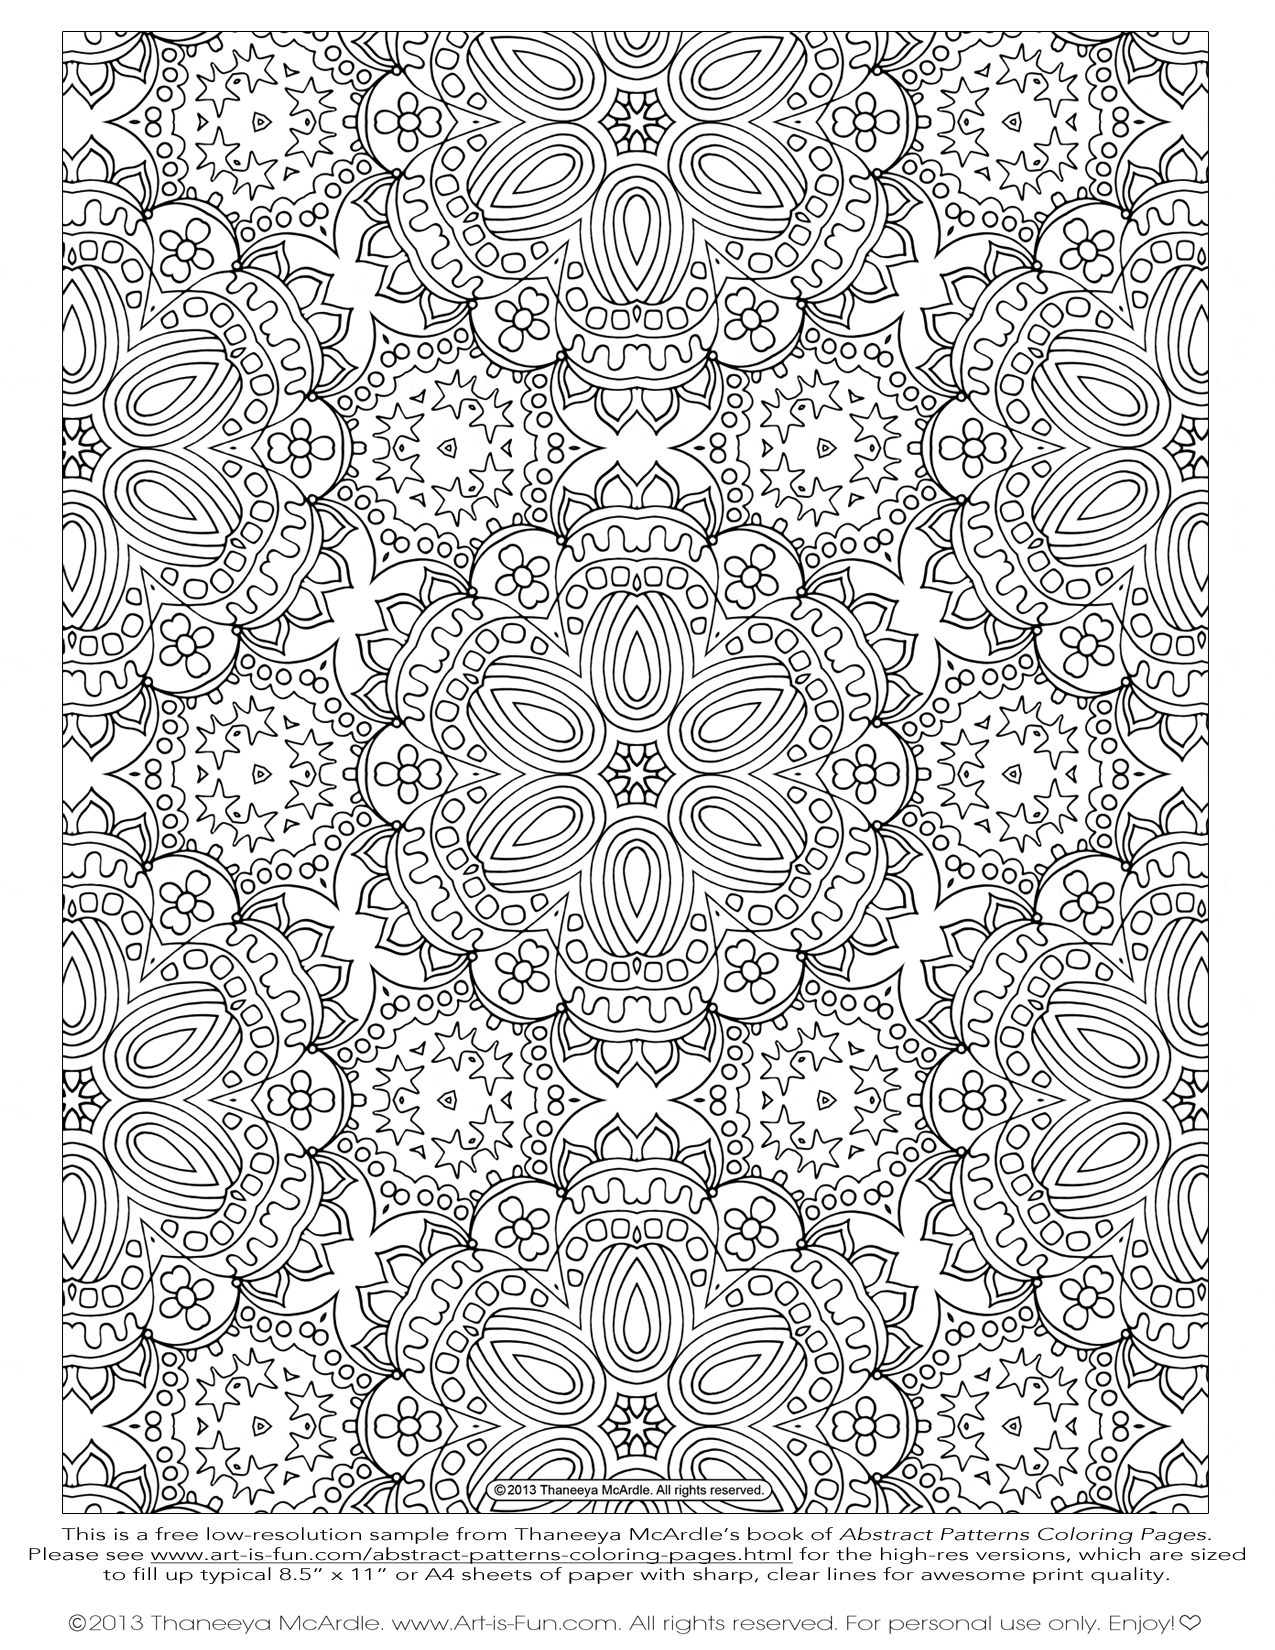 Free Abstract Animal Coloring Pages, Download Free Abstract Animal Coloring  Pages png images, Free ClipArts on Clipart Library